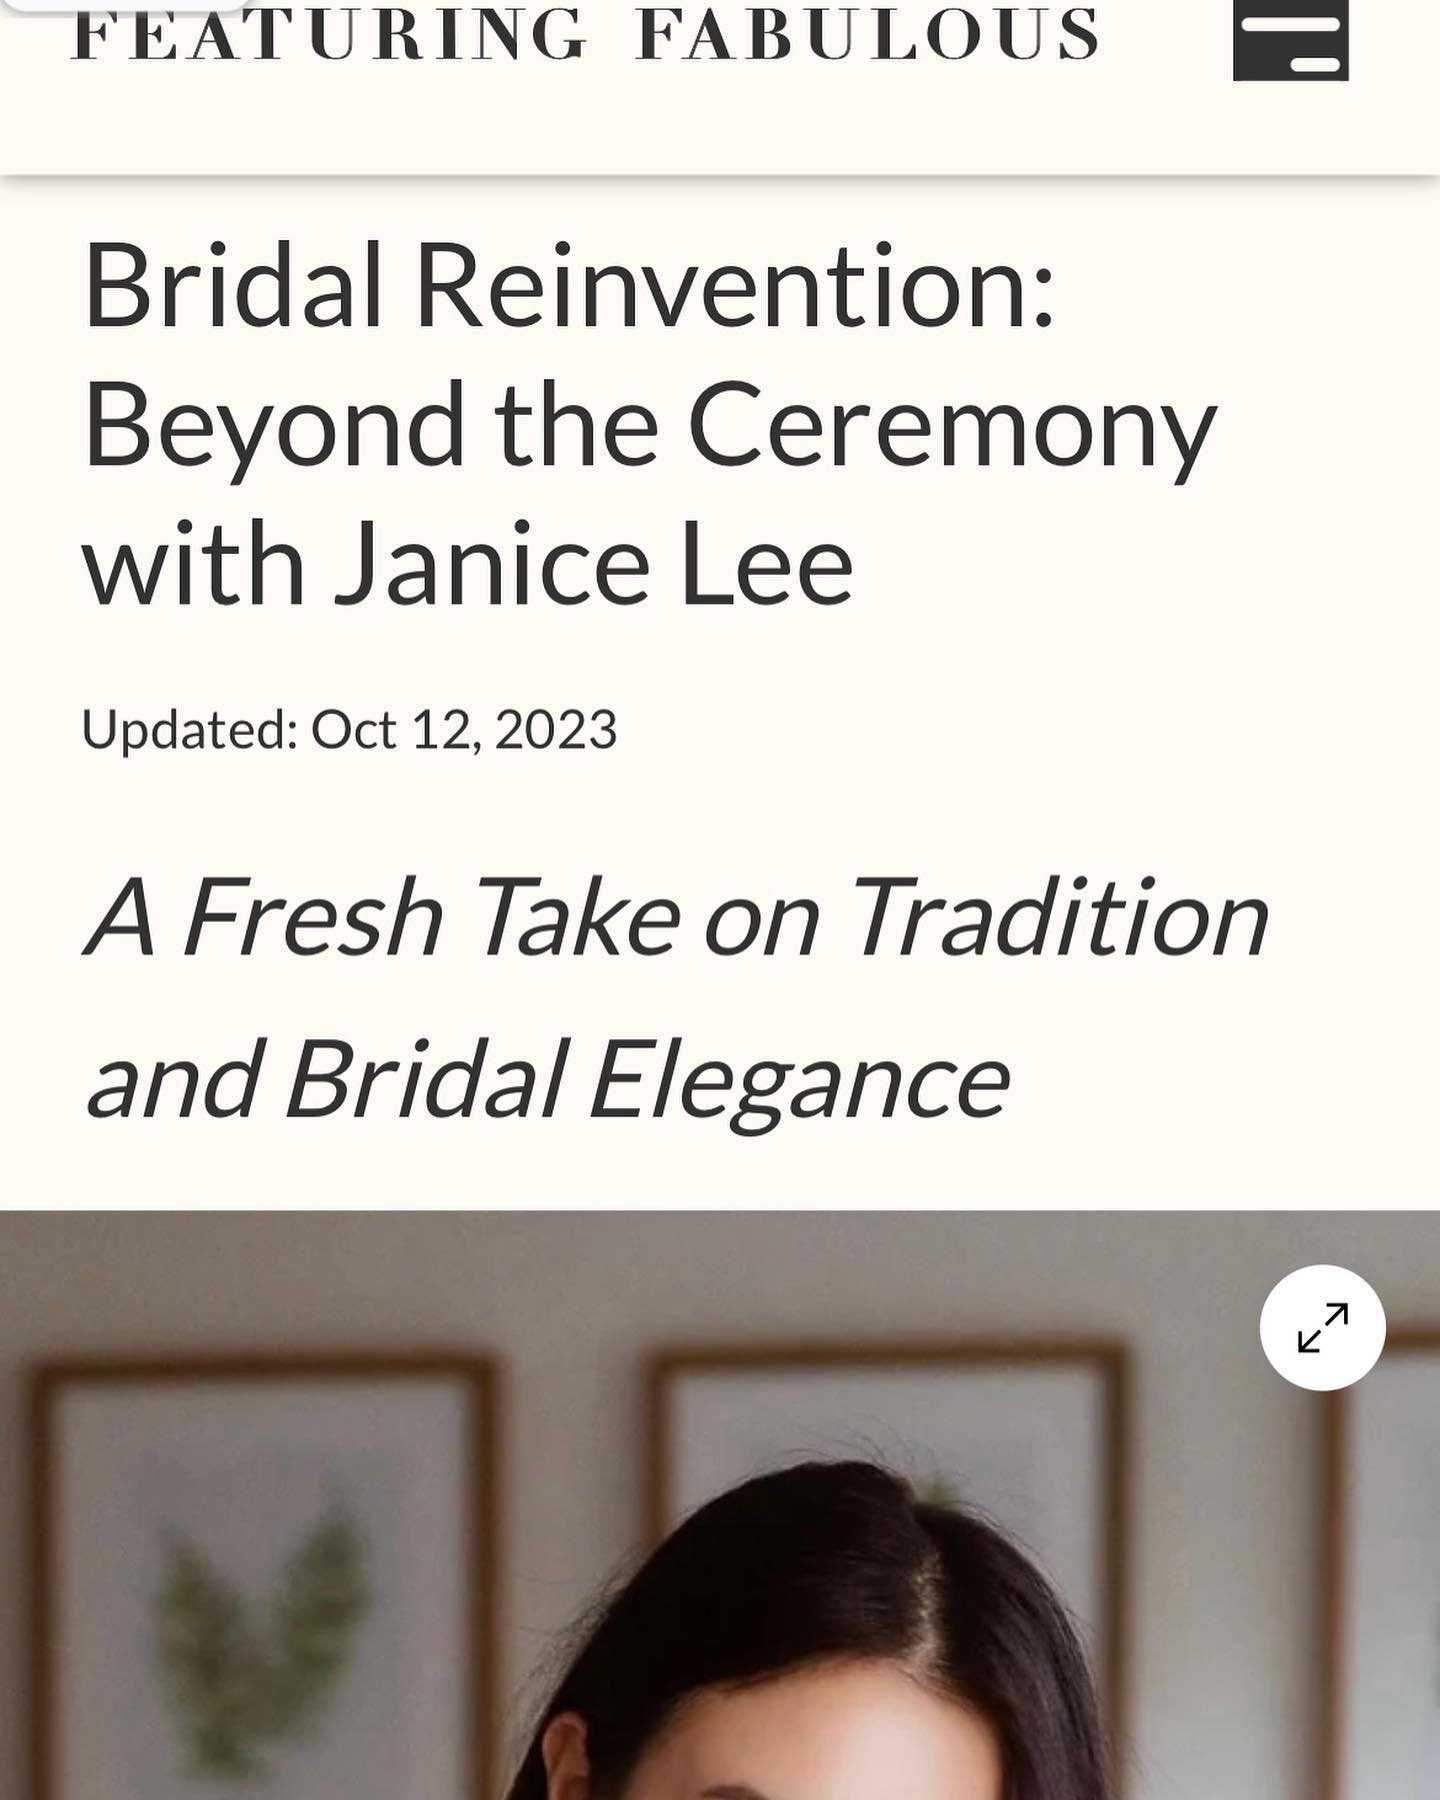 Check out the wonderful article about Beyond the Ceremony on Featuring Fabulous ✨